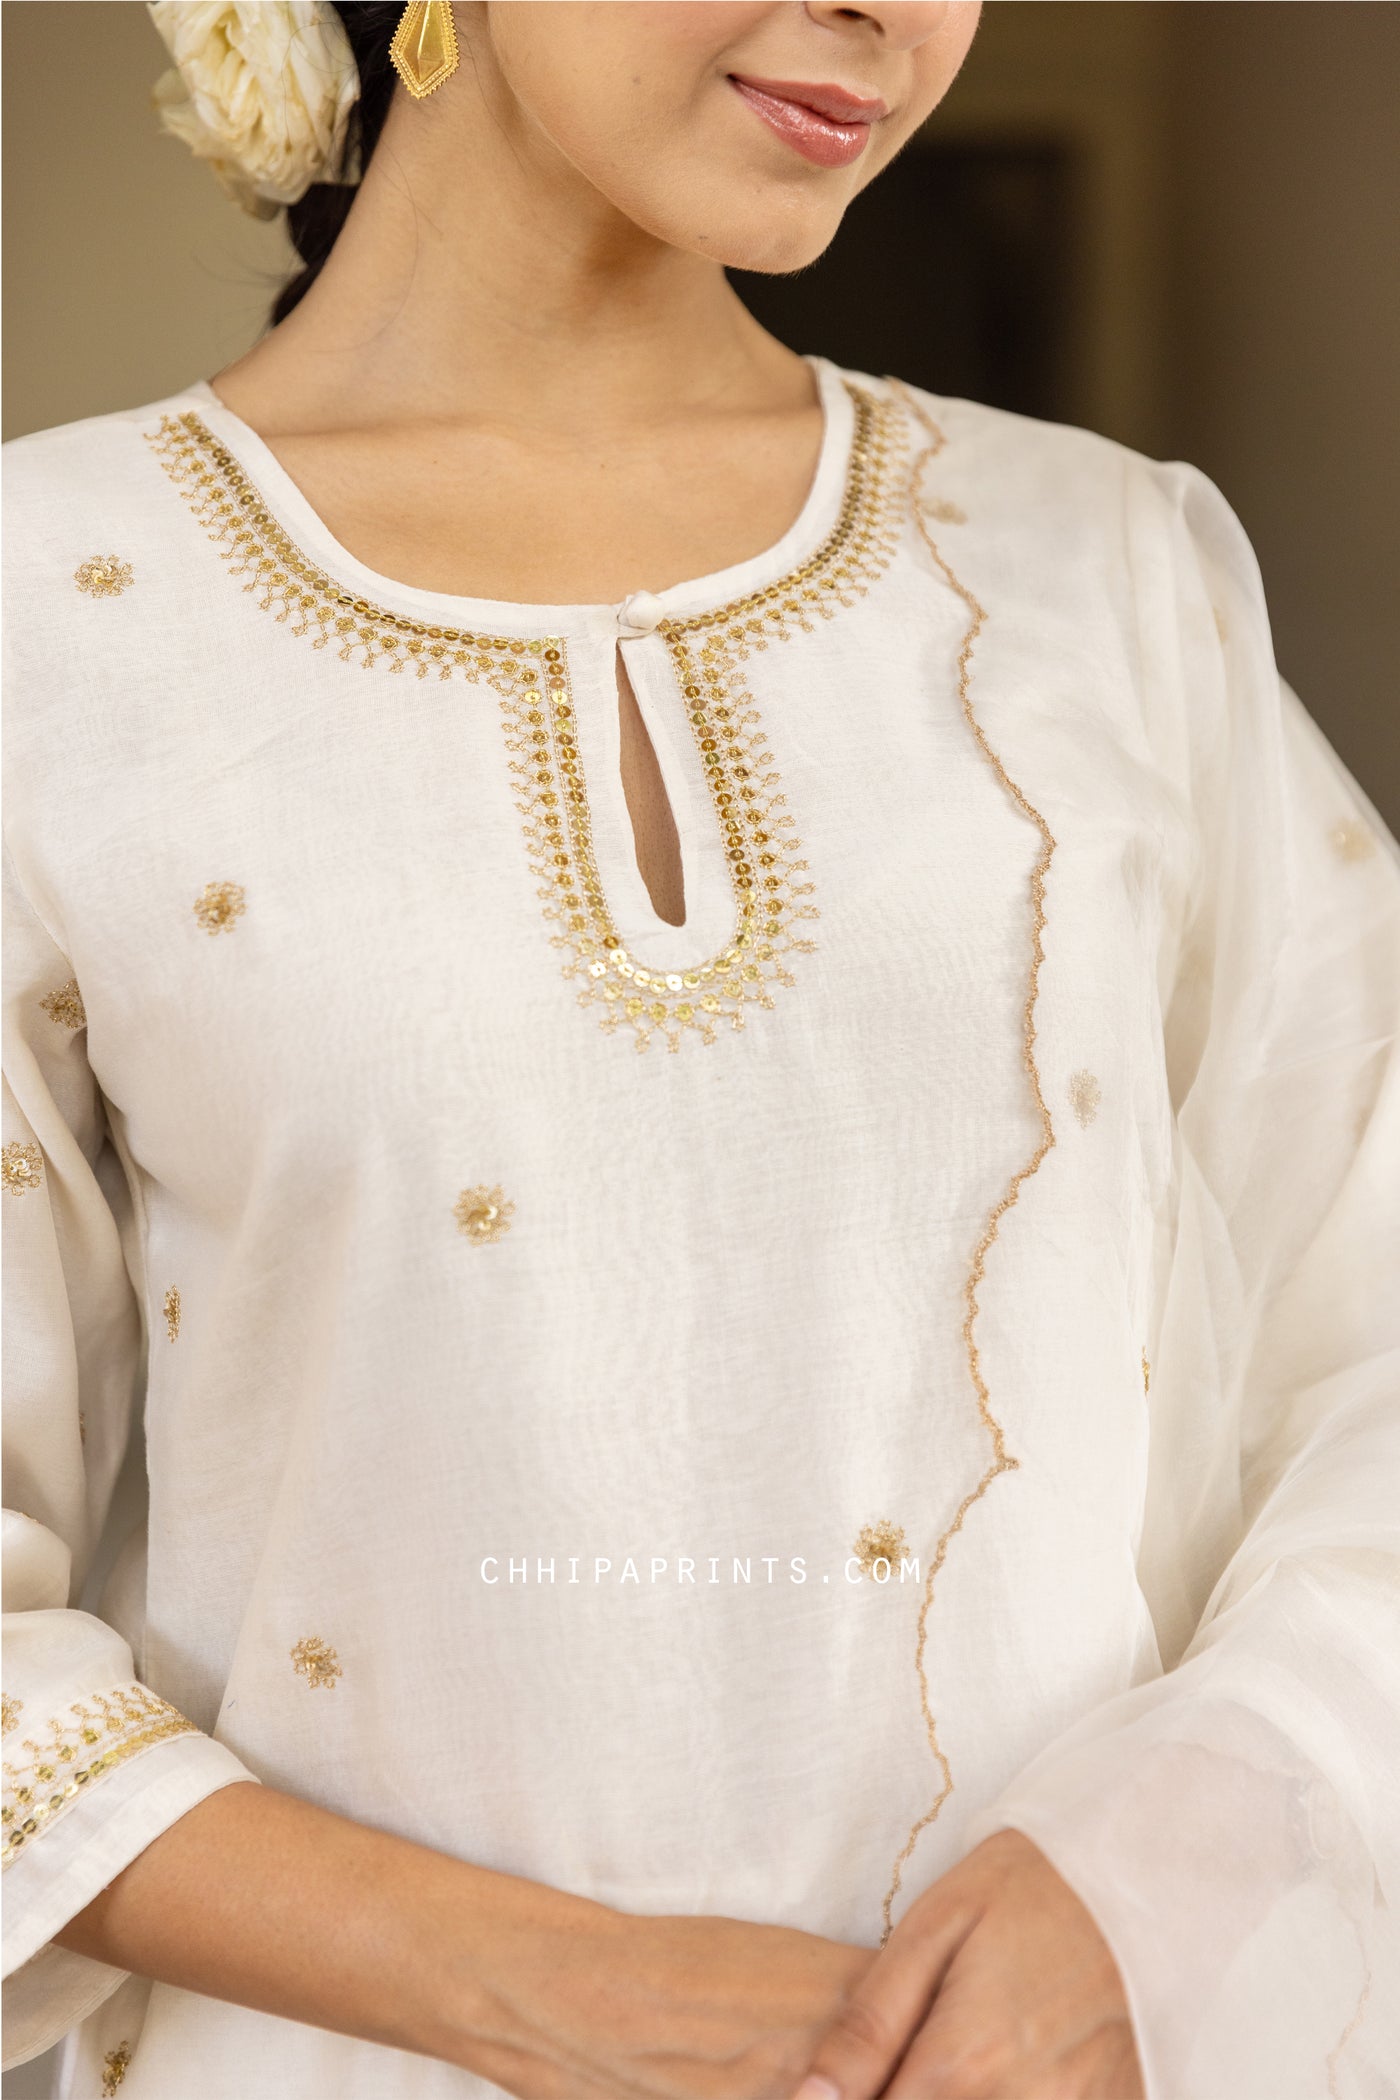 Chanderi SIlk Hand Embroidery Suit Set in Ivory from Jashn Collection